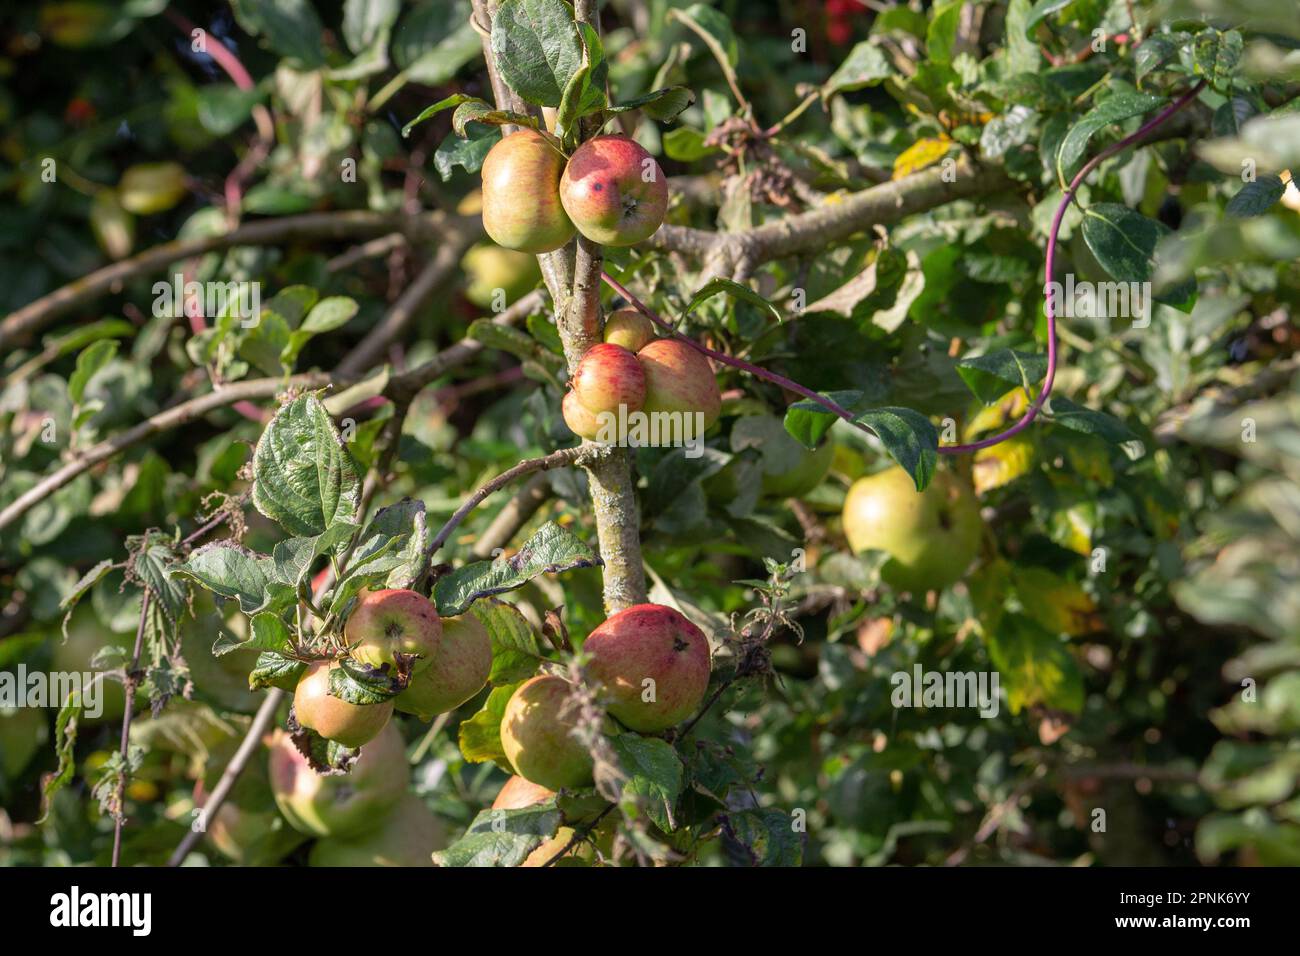 ripe green and red apples hanging from a branch with green leaves Stock Photo